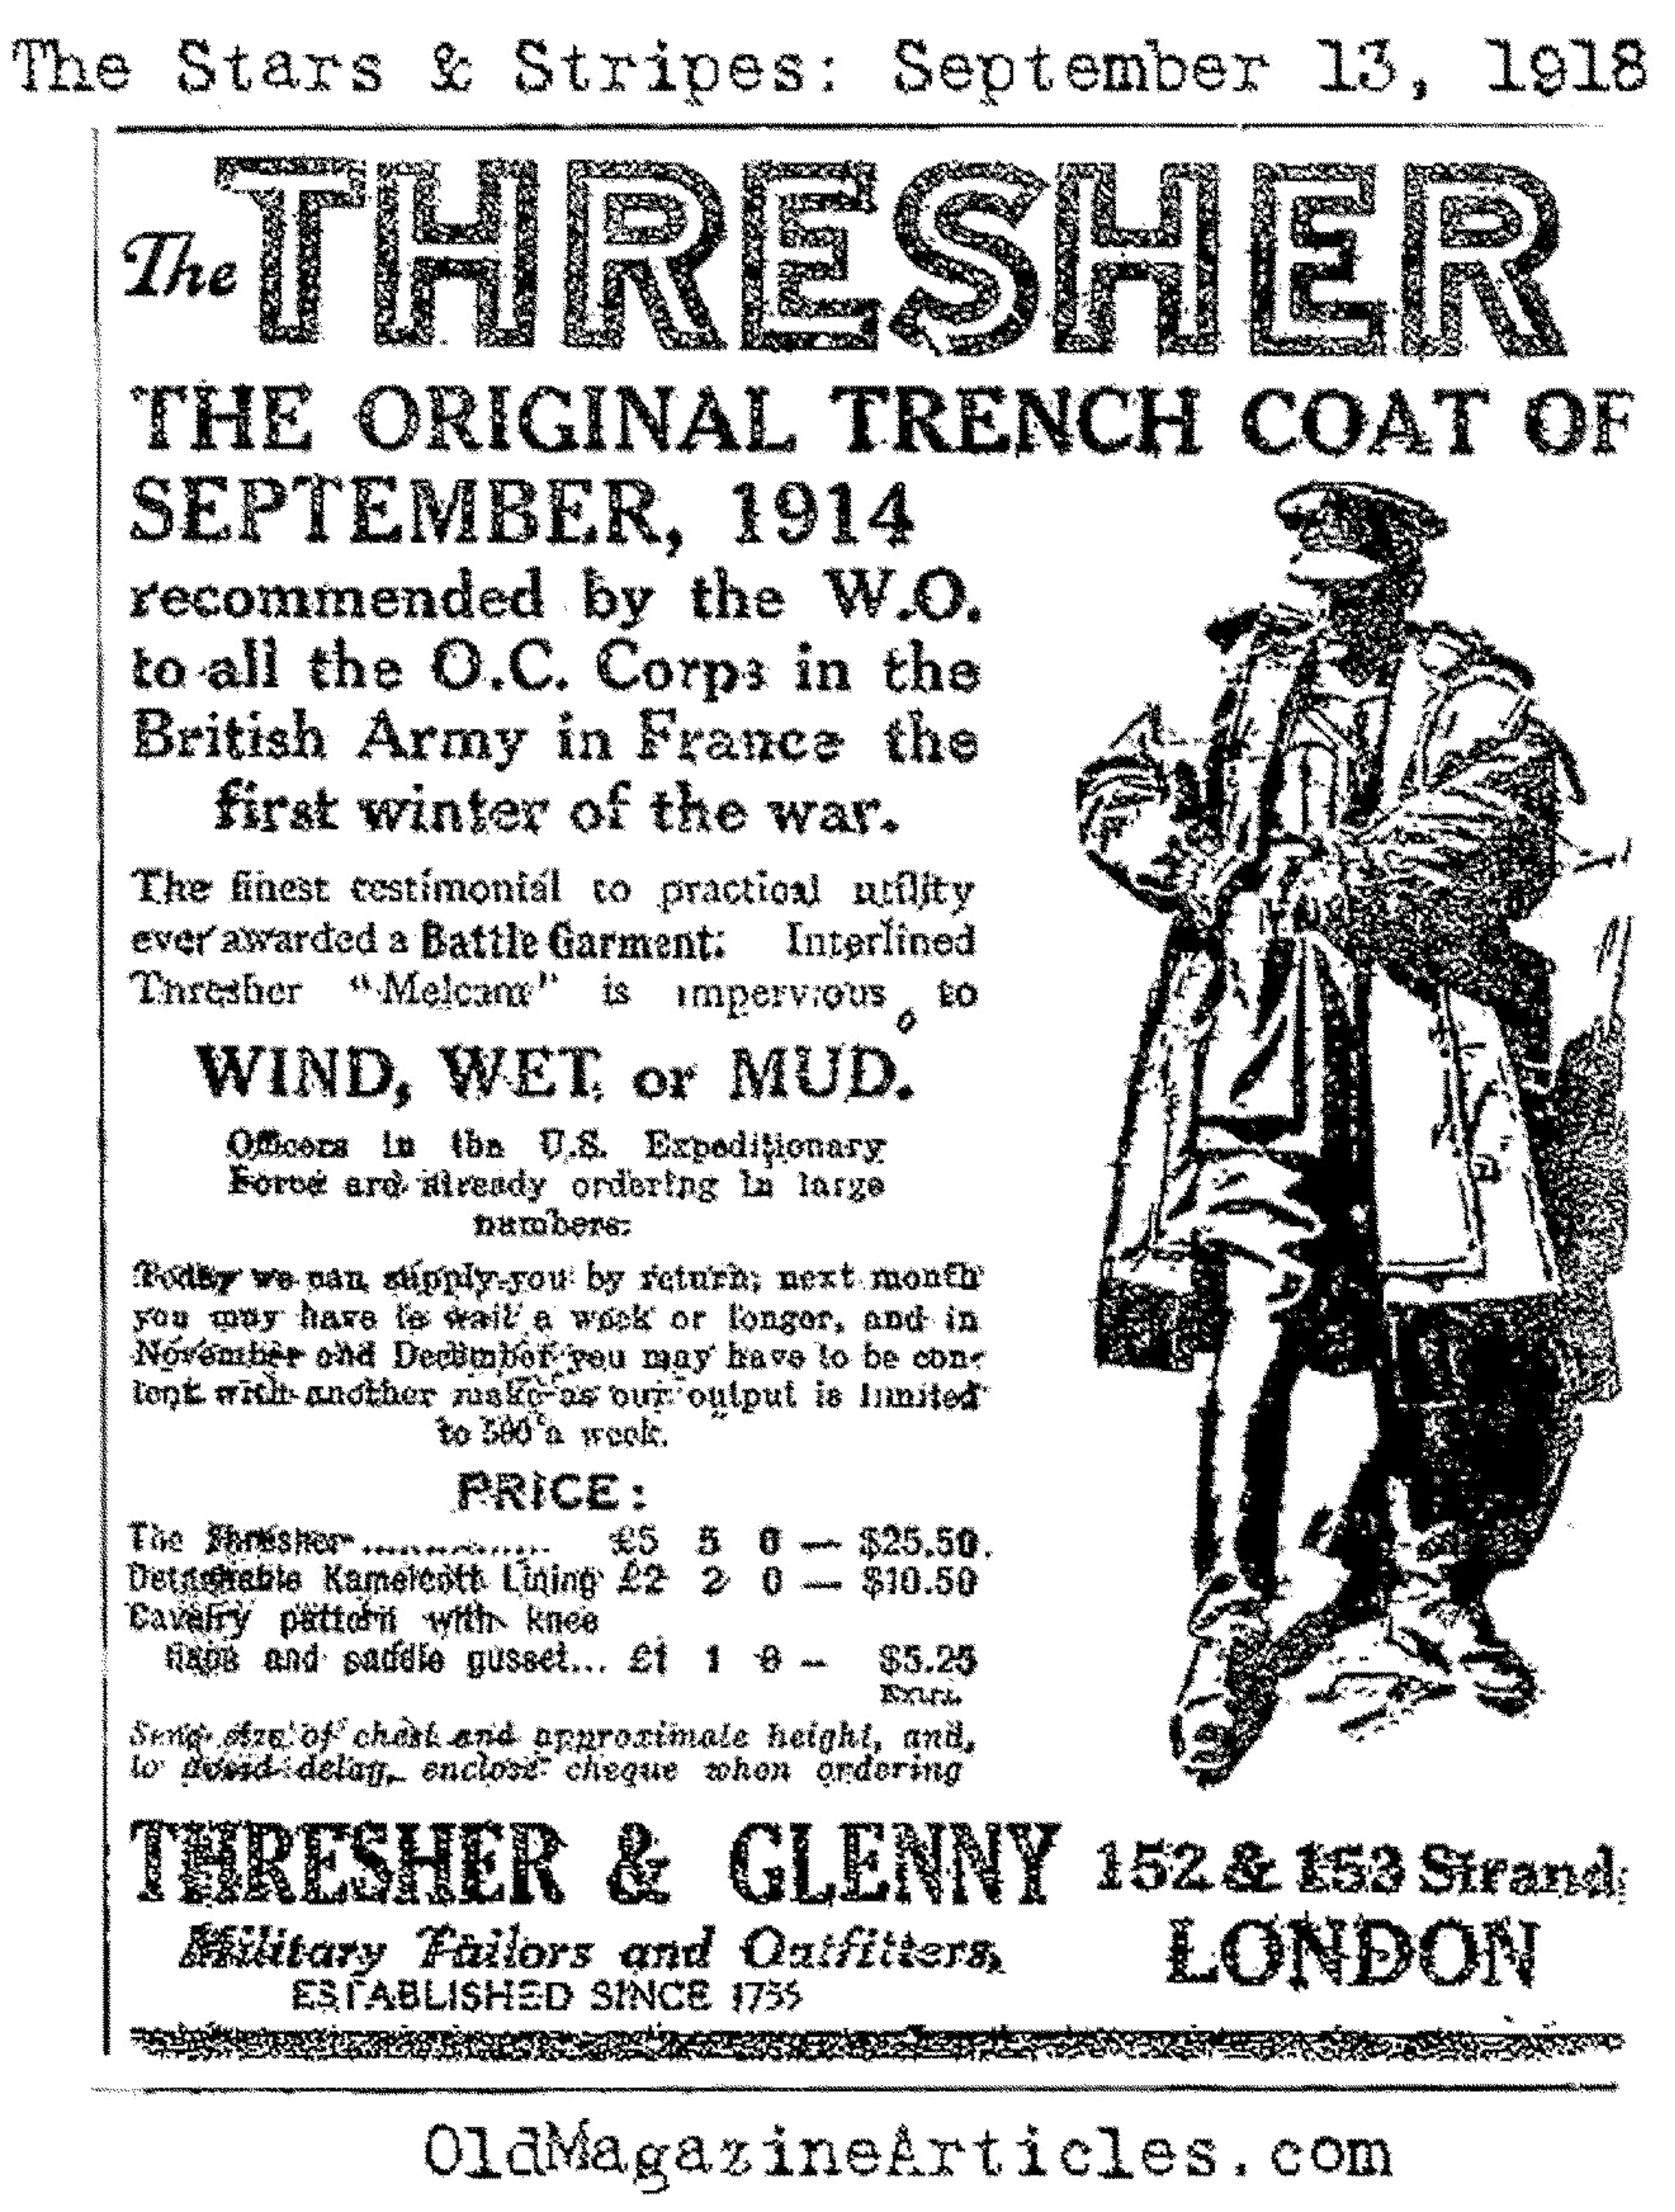 A Trench Coat by Thresher  and Glenny   (The Stars and Stripes, 1918)